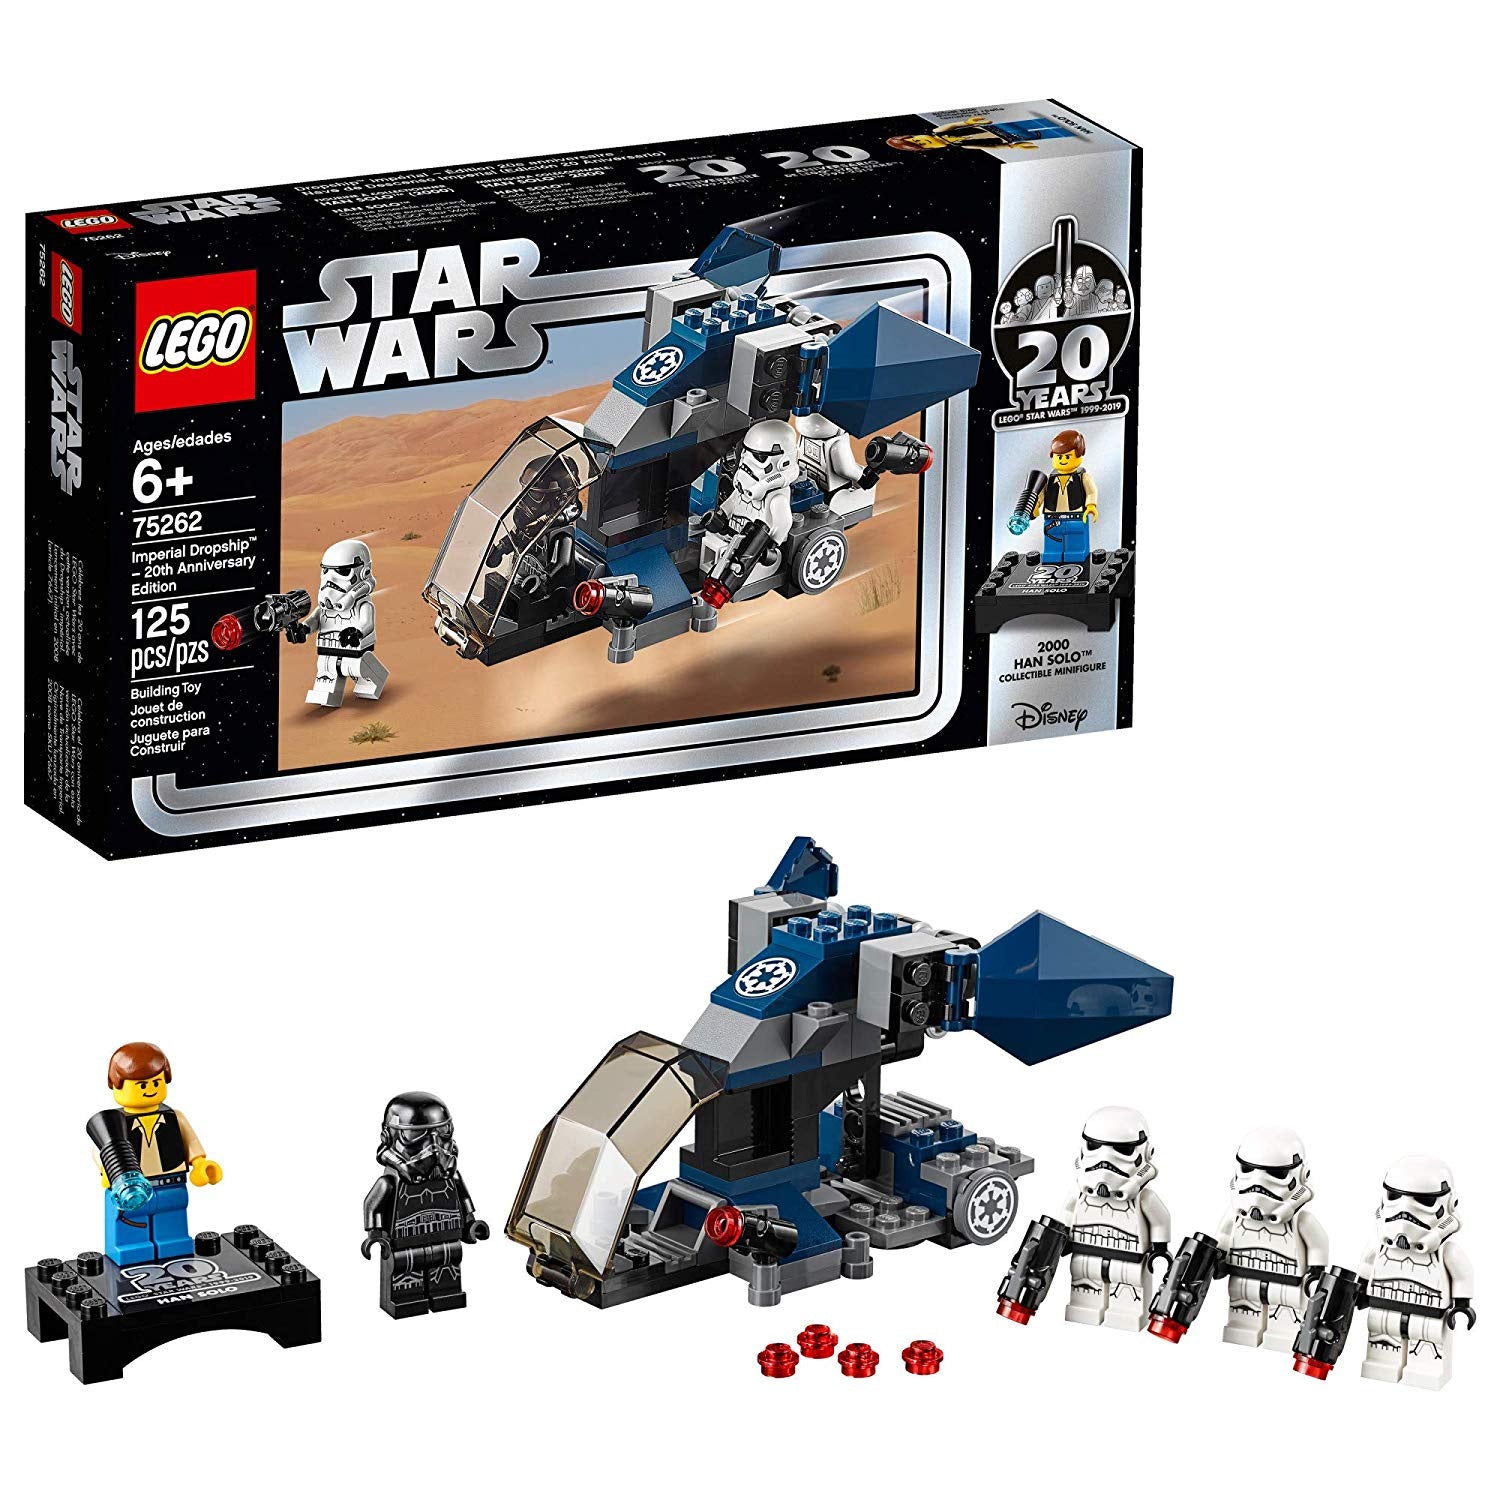 Series: Lego Star Wars: Imperial Dropship 75262